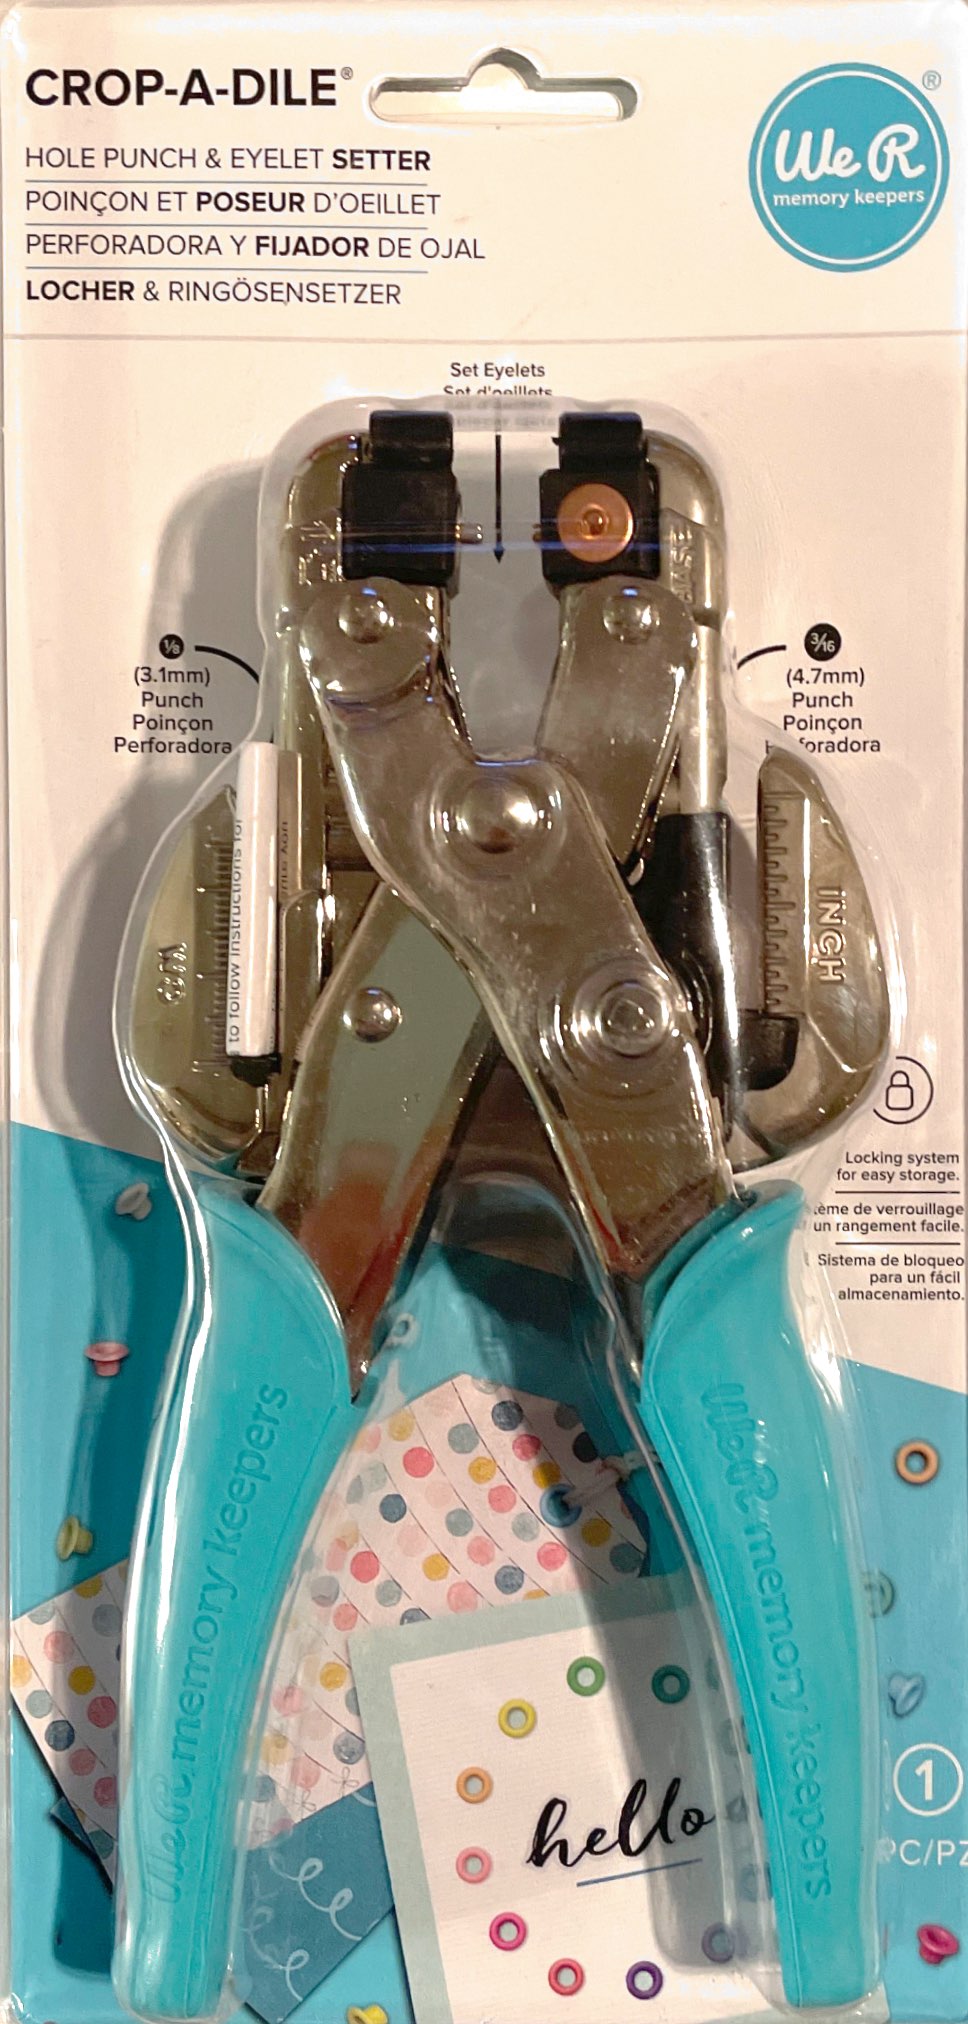 We R Memory Keepers Tools - Crop-A-Dile Hole Punch Eyelet Setter